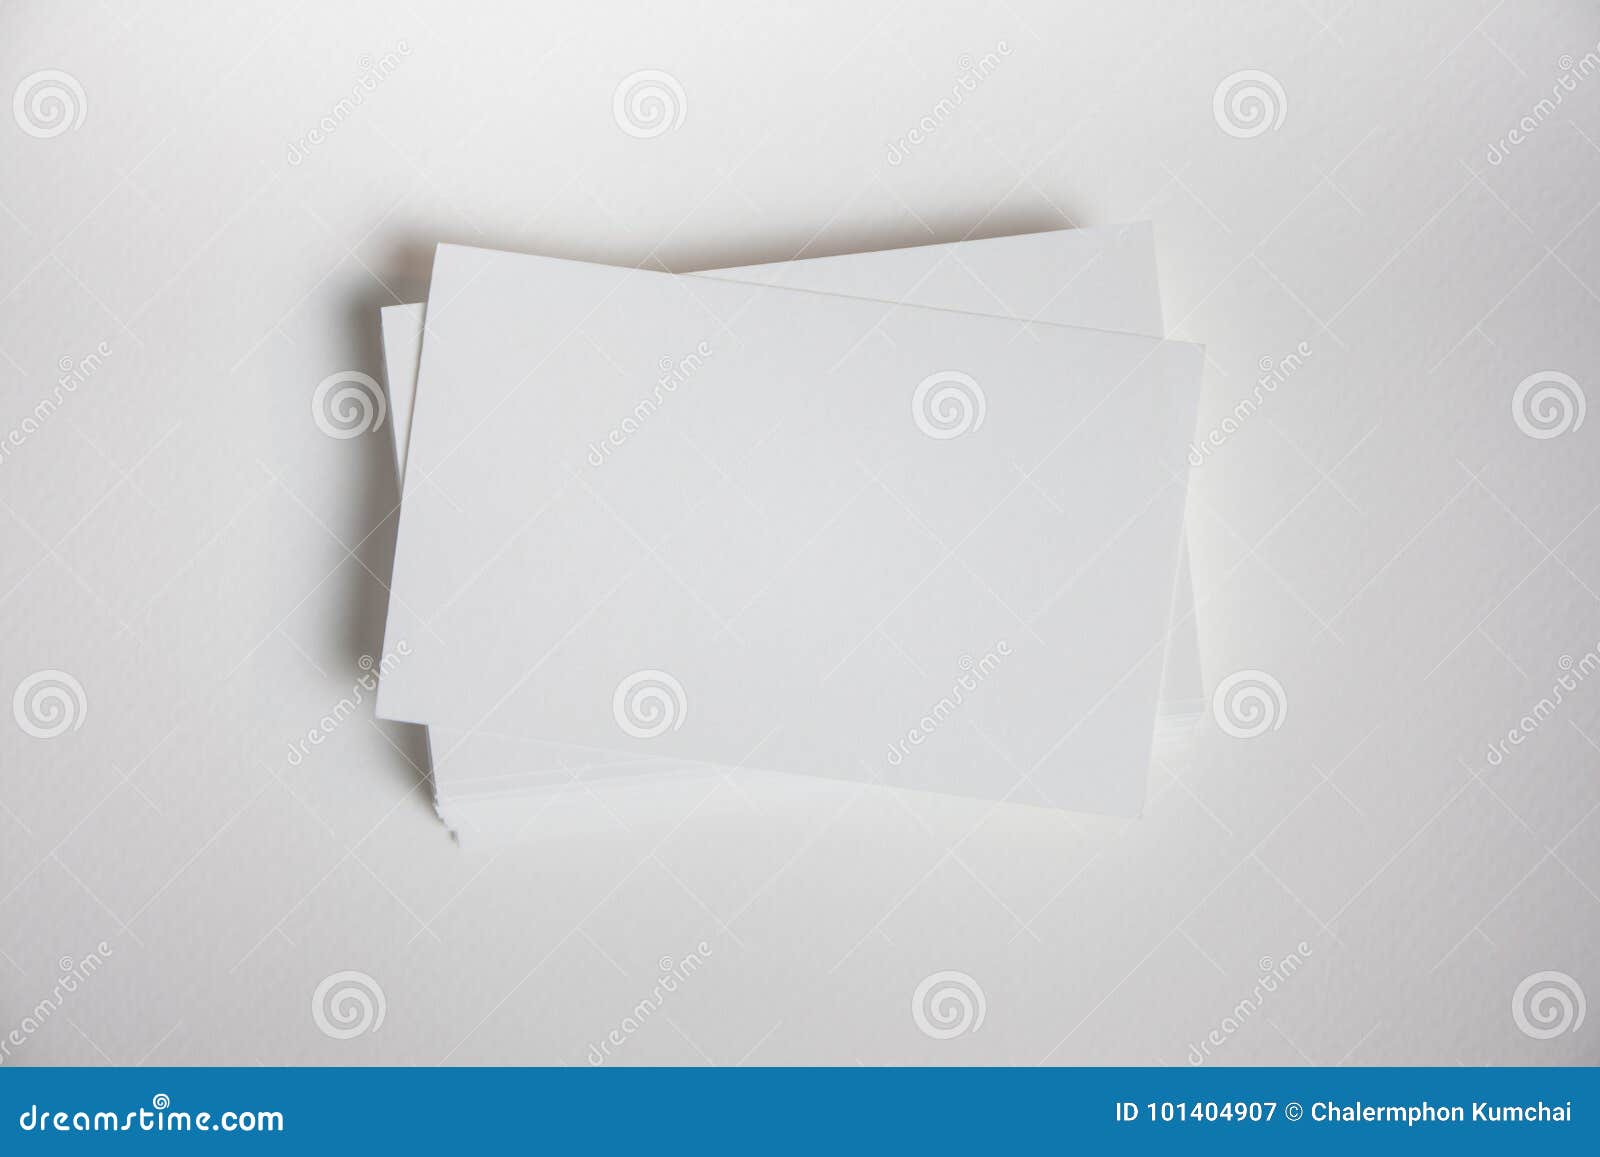 Download Mockup Of Business Cards Fan Stack At White Textured Paper Background. Stock Image - Image of ...